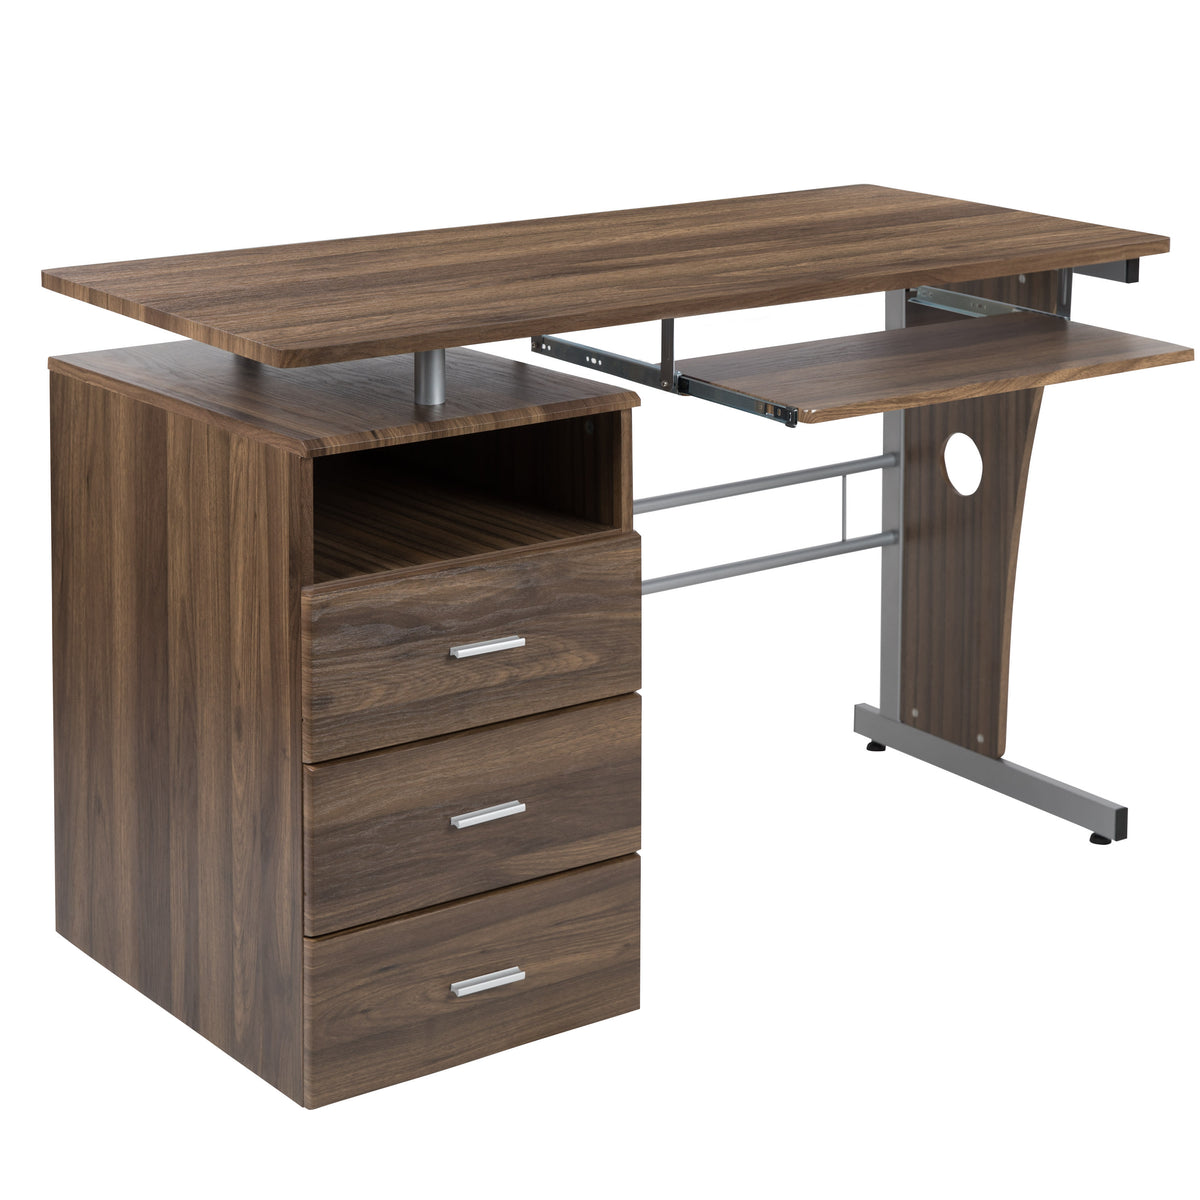 Rustic Walnut |#| Rustic Walnut Desk with Three Drawer Single Pedestal and Pull-Out Keyboard Tray